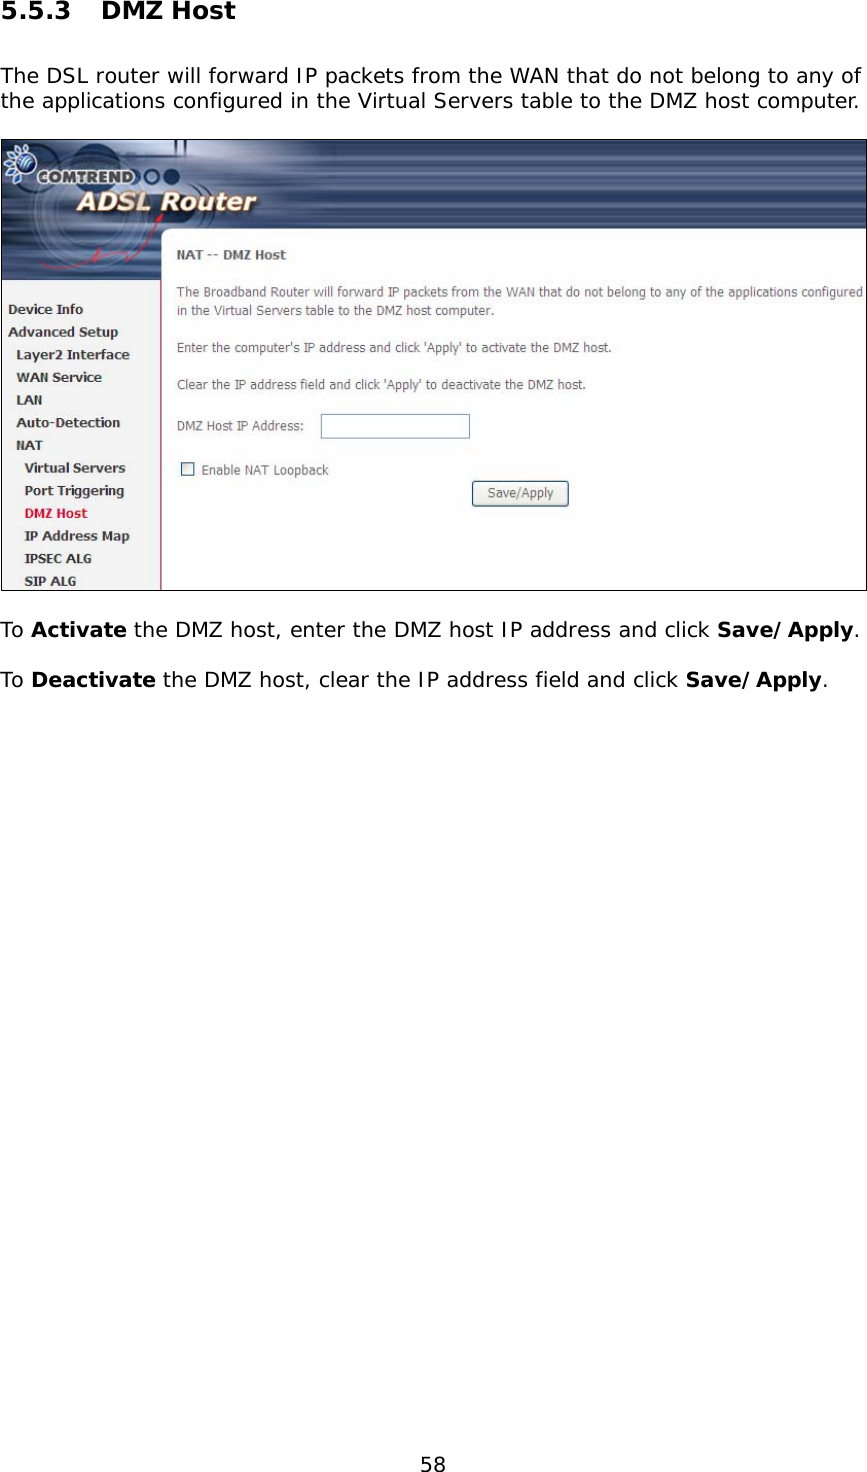  58 5.5.3 DMZ Host The DSL router will forward IP packets from the WAN that do not belong to any of the applications configured in the Virtual Servers table to the DMZ host computer.    To Activate the DMZ host, enter the DMZ host IP address and click Save/Apply.  To Deactivate the DMZ host, clear the IP address field and click Save/Apply.          